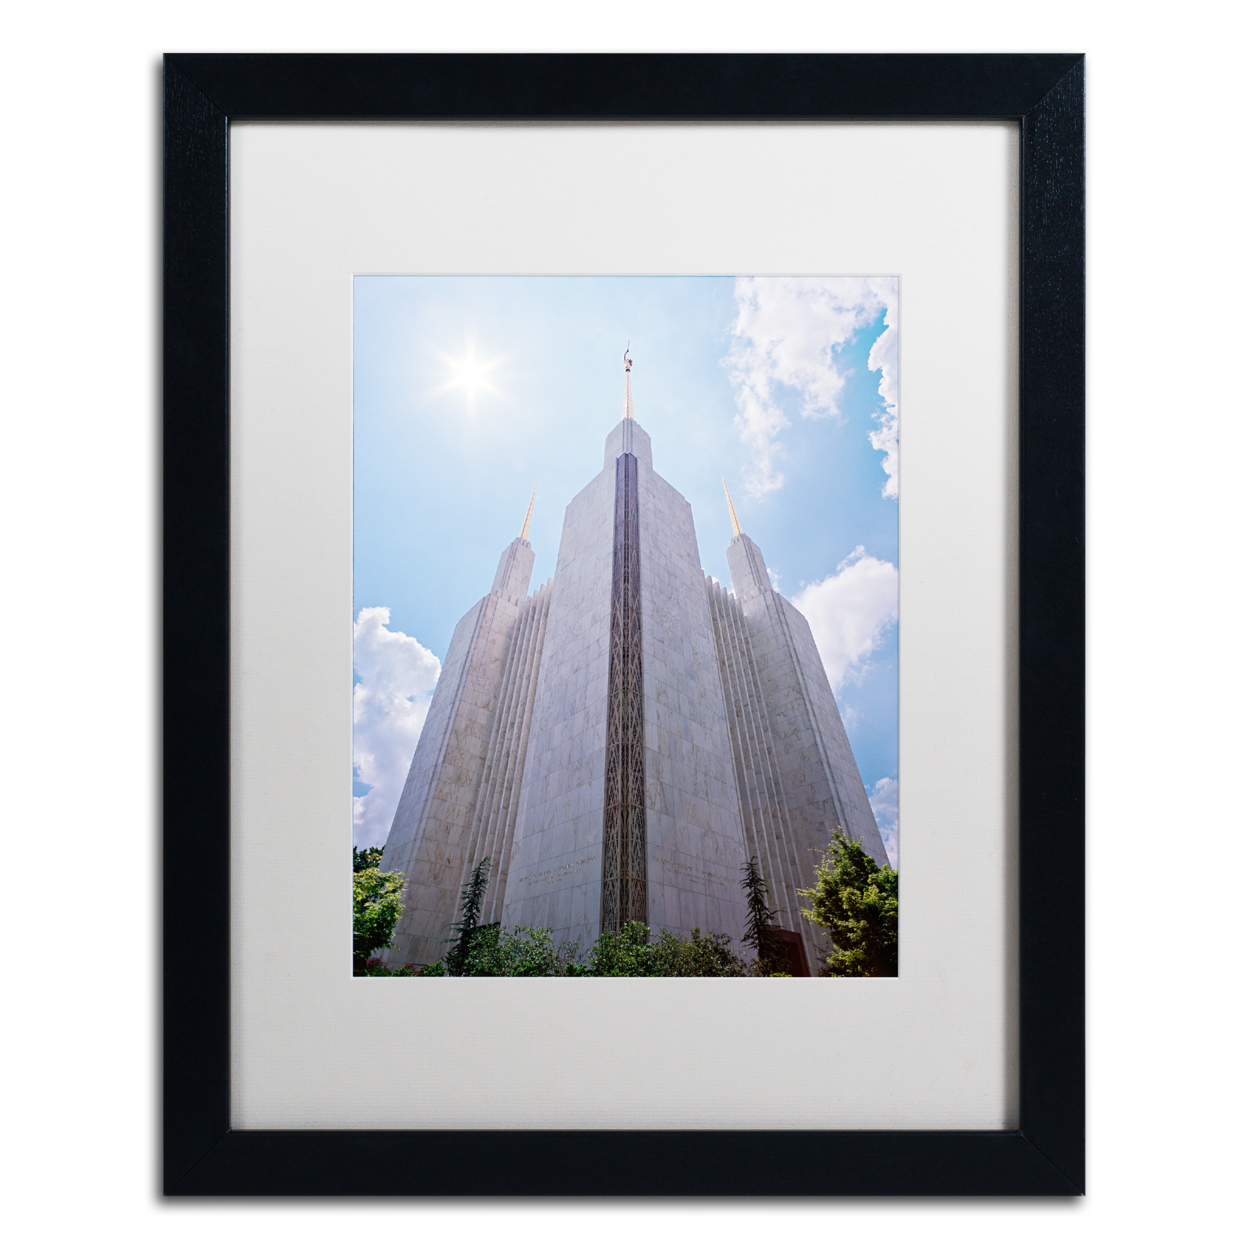 Gregory O'Hanlon 'LDS Temple Under The Sun' Black Wooden Framed Art 18 X 22 Inches